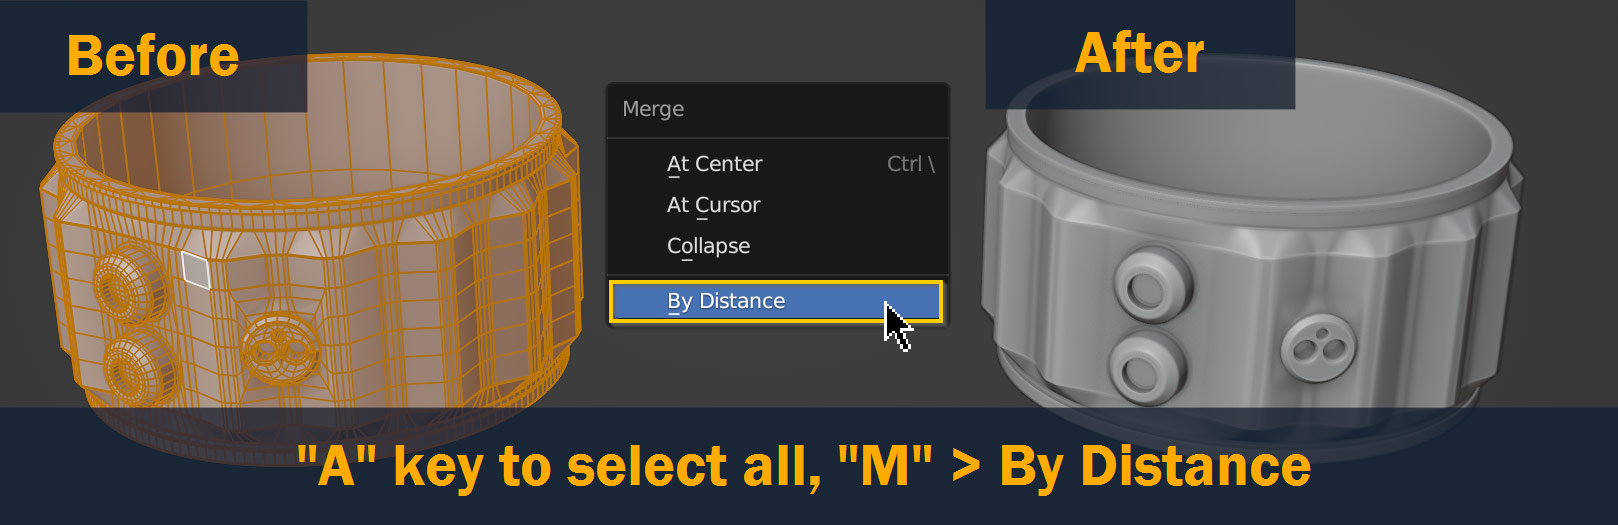 select merge by distance